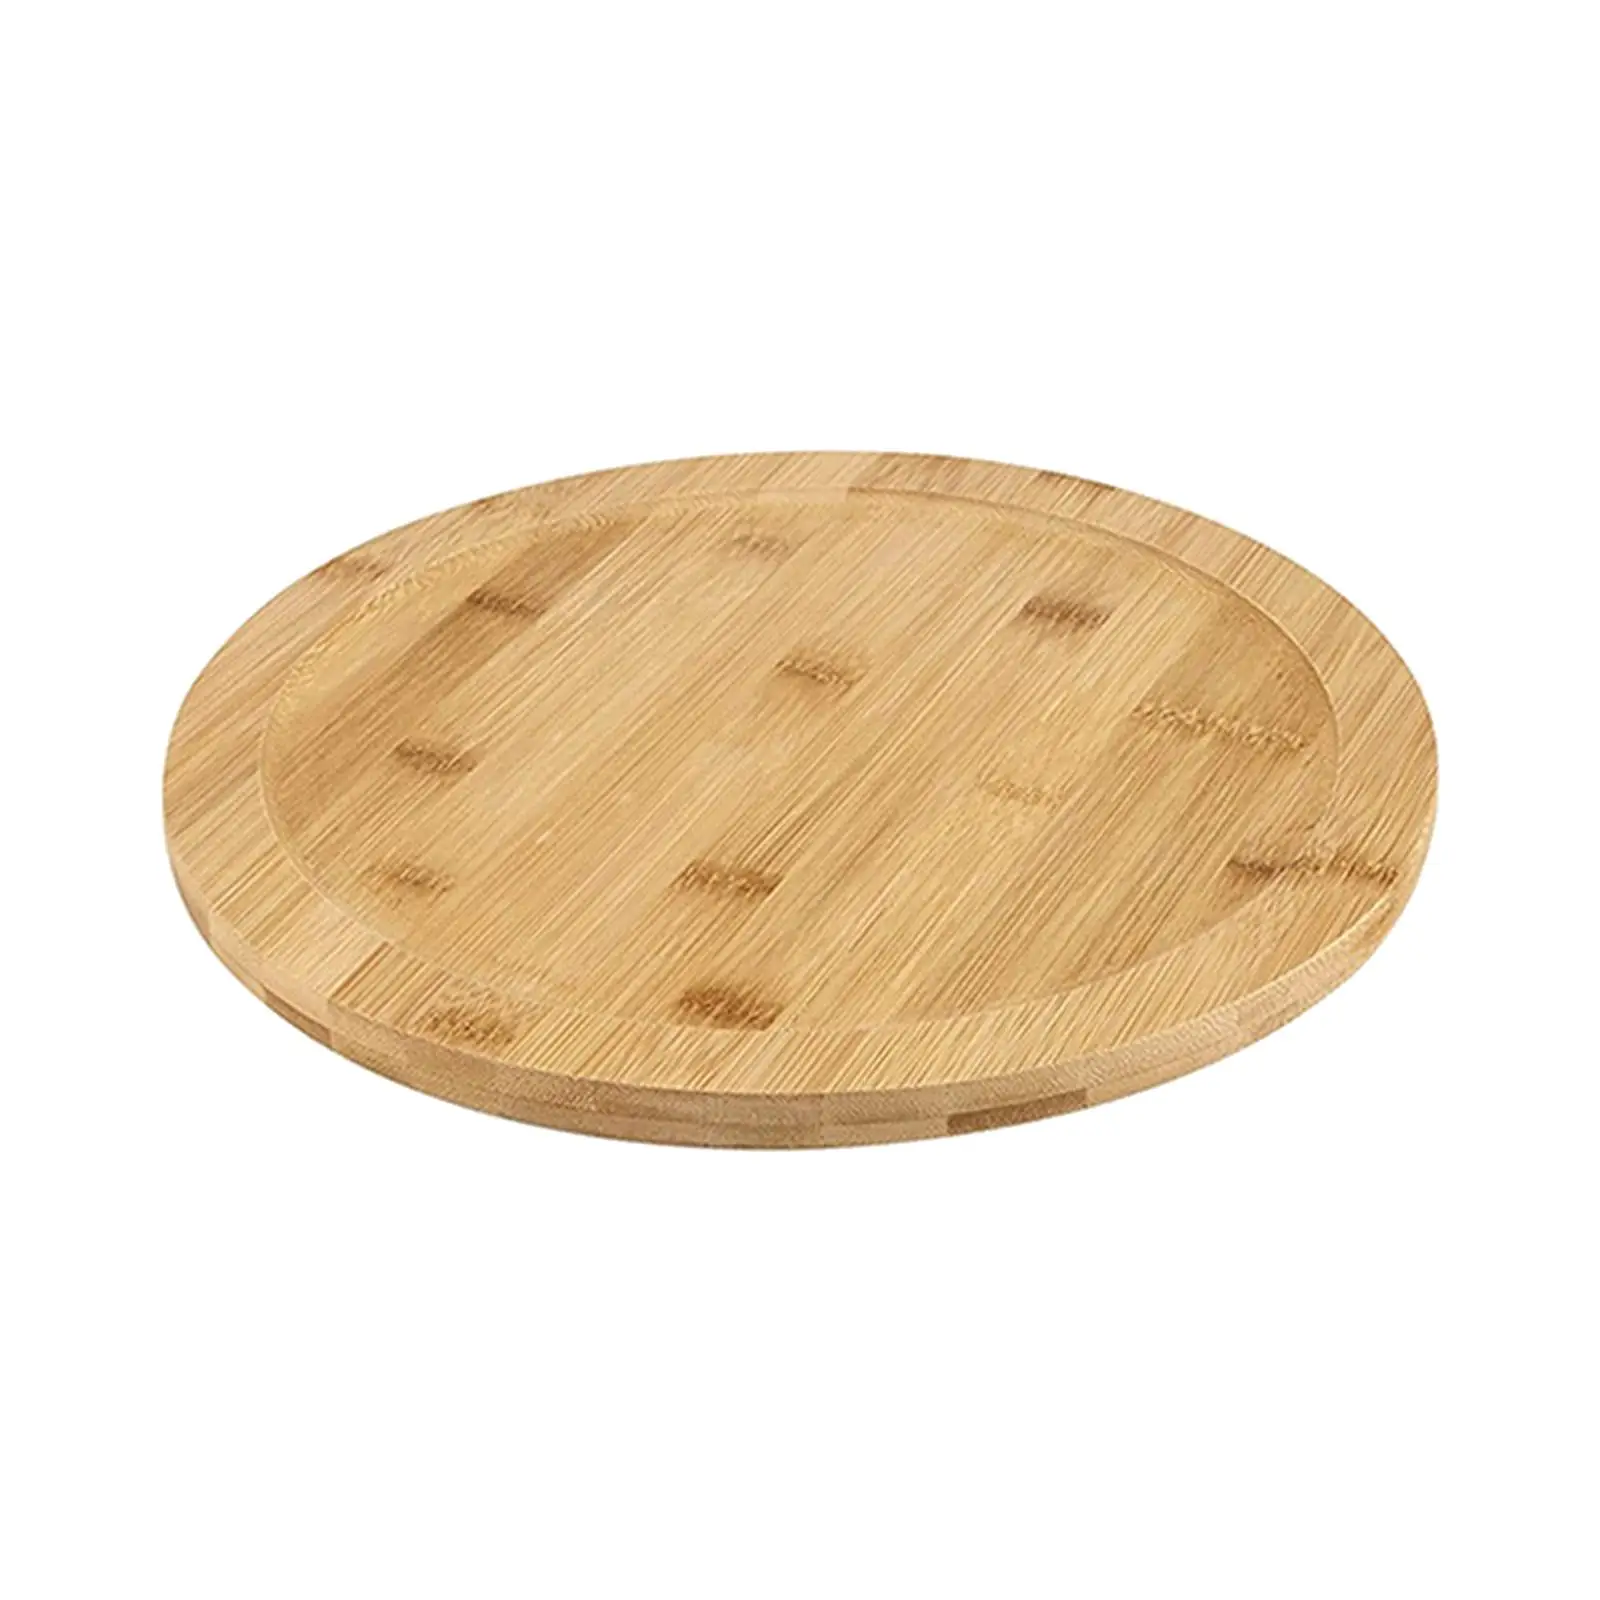 Rotating Base Serving Board Serving Tray Wooden Rotating Dining Plate for Pantry Home Cabinet Dining Table Kitchen